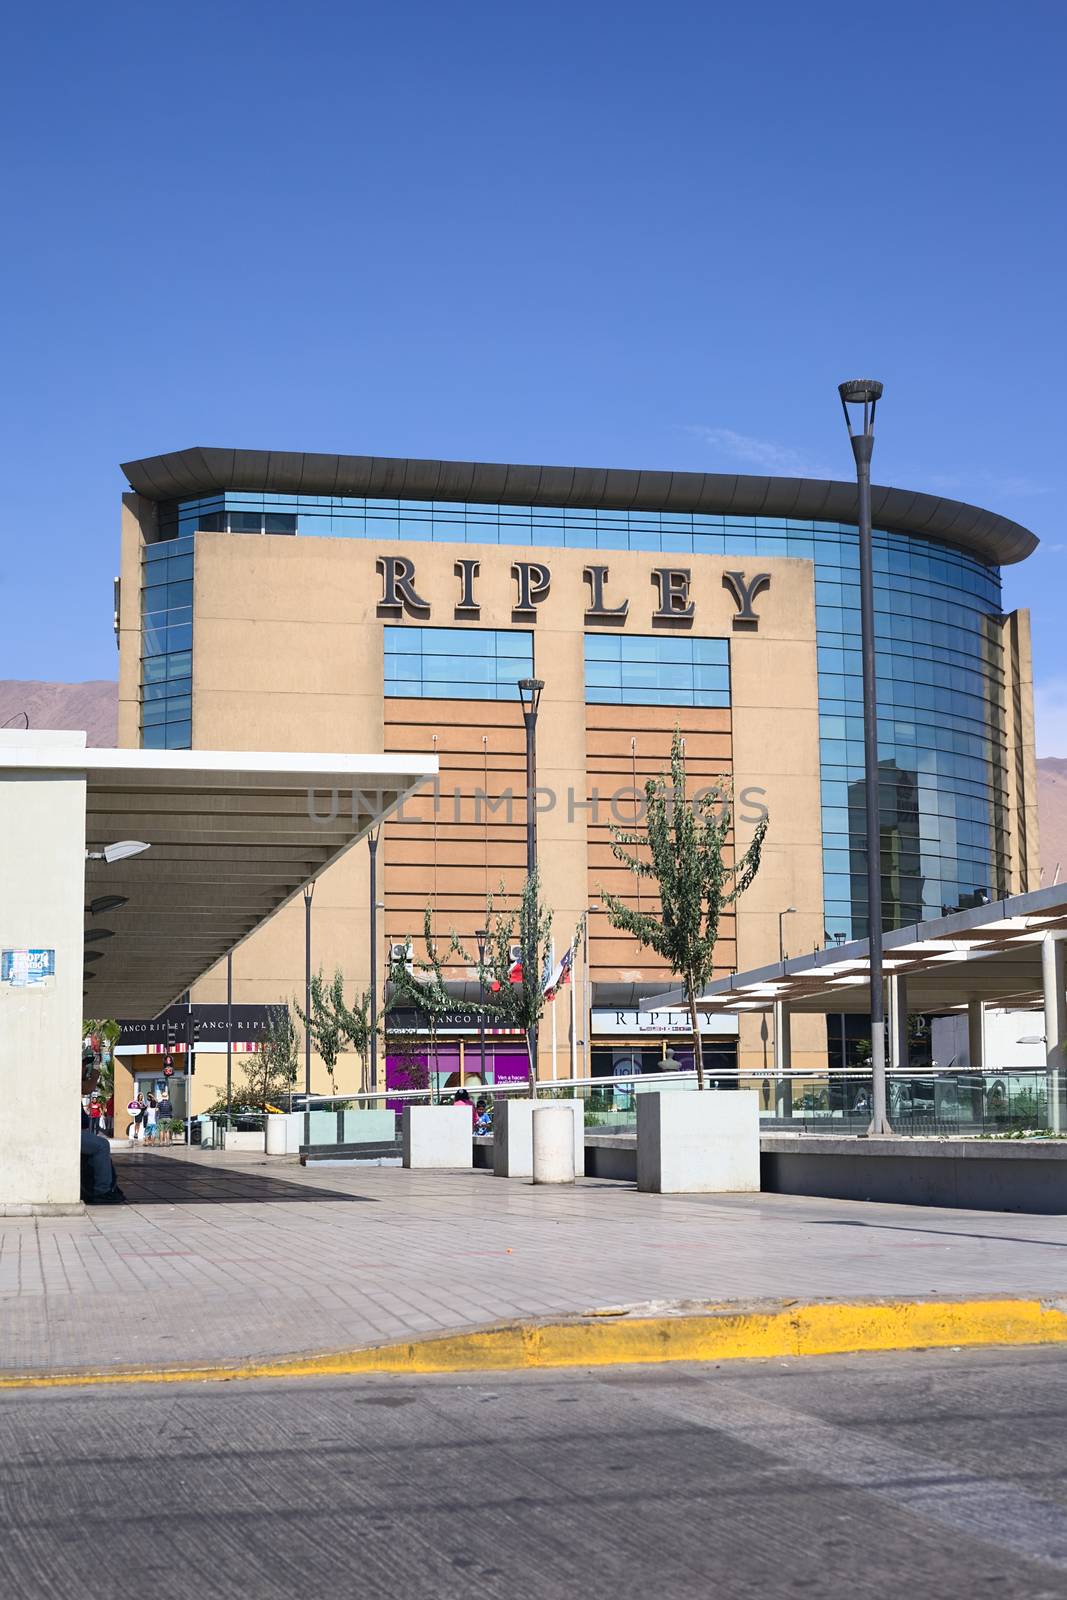 Ripley Department Store in Iquique, Chile by sven